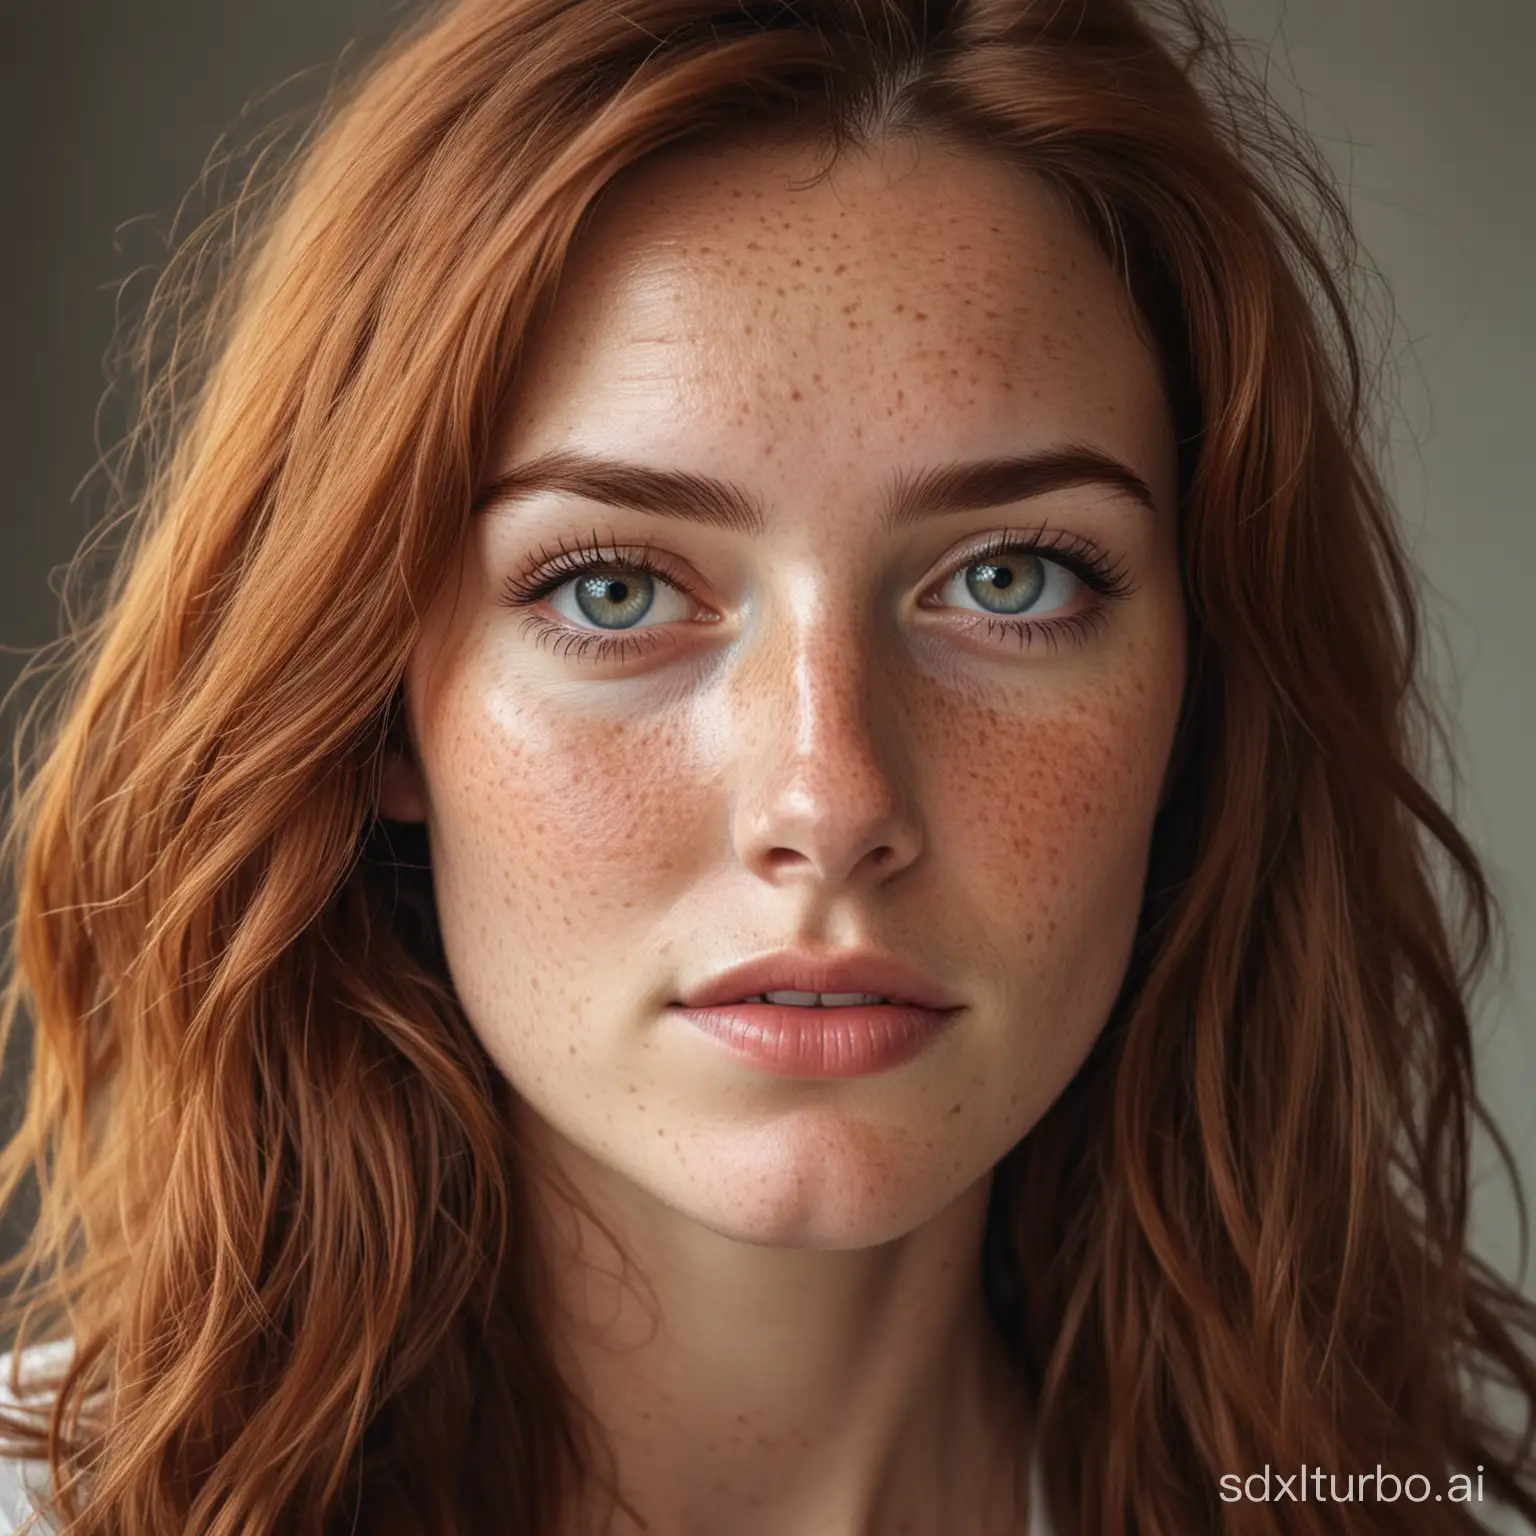 1 beautiful, sophisticated European woman with freckles on her face